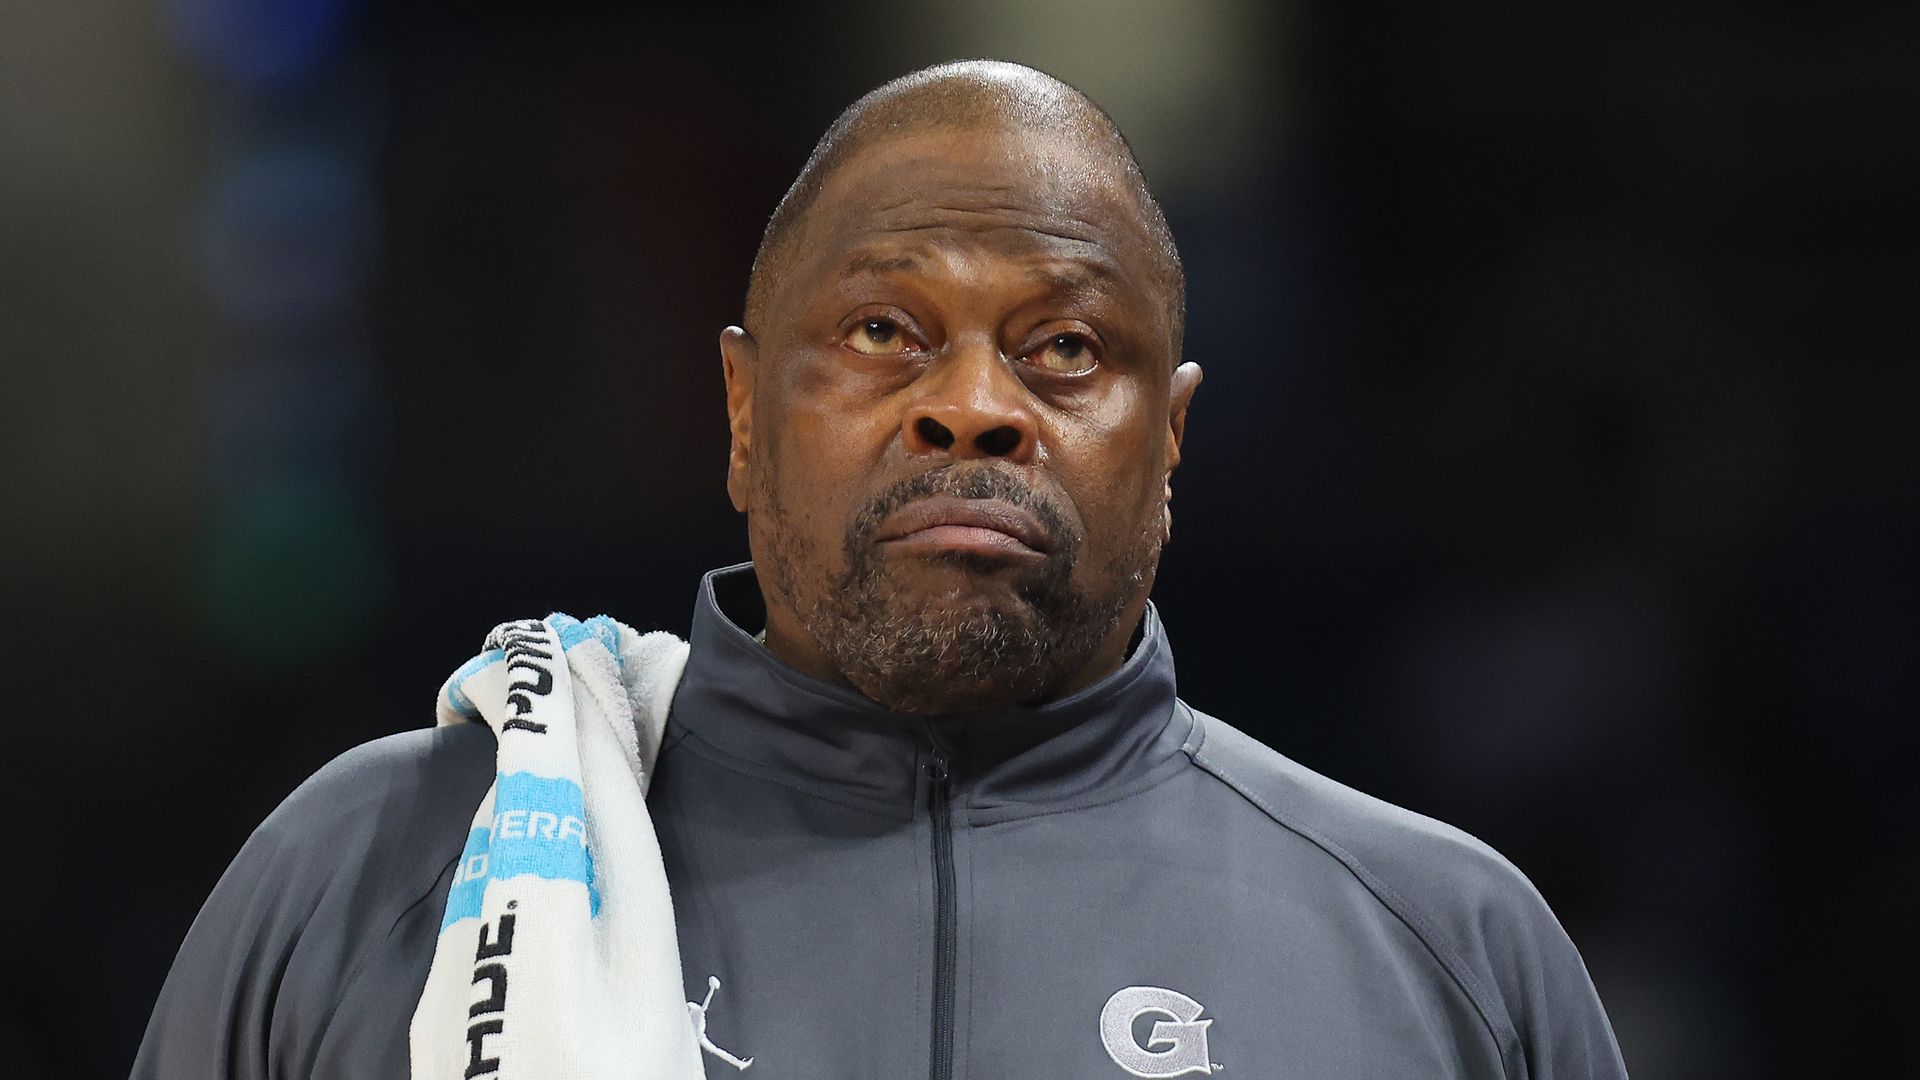 Georgetown hires Patrick Ewing as men's basketball coach, Sports